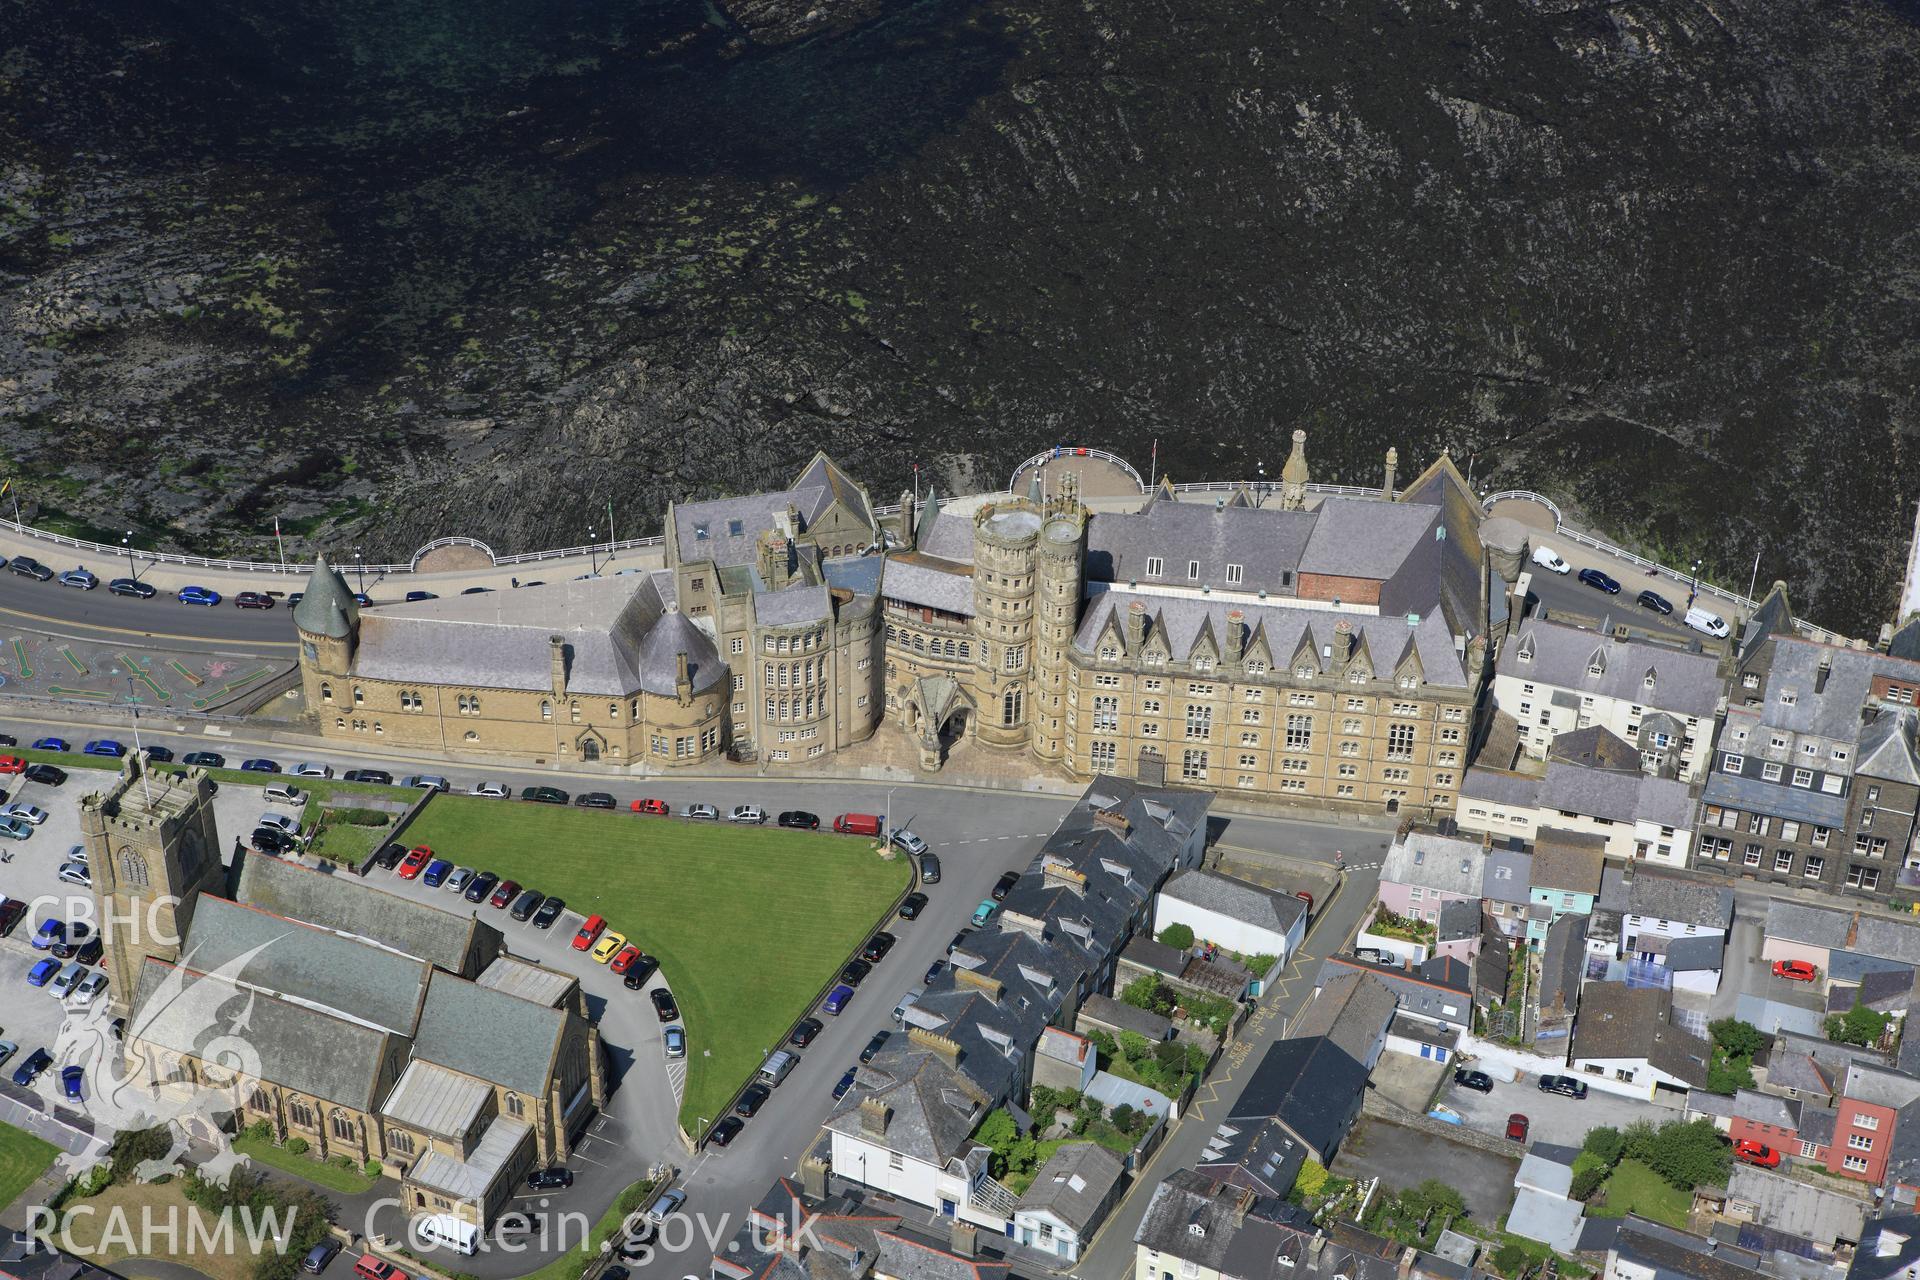 RCAHMW colour oblique aerial photograph of Castle House Hotel (Old College), University College of Wales, Aberystwyth. Taken on 02 June 2009 by Toby Driver